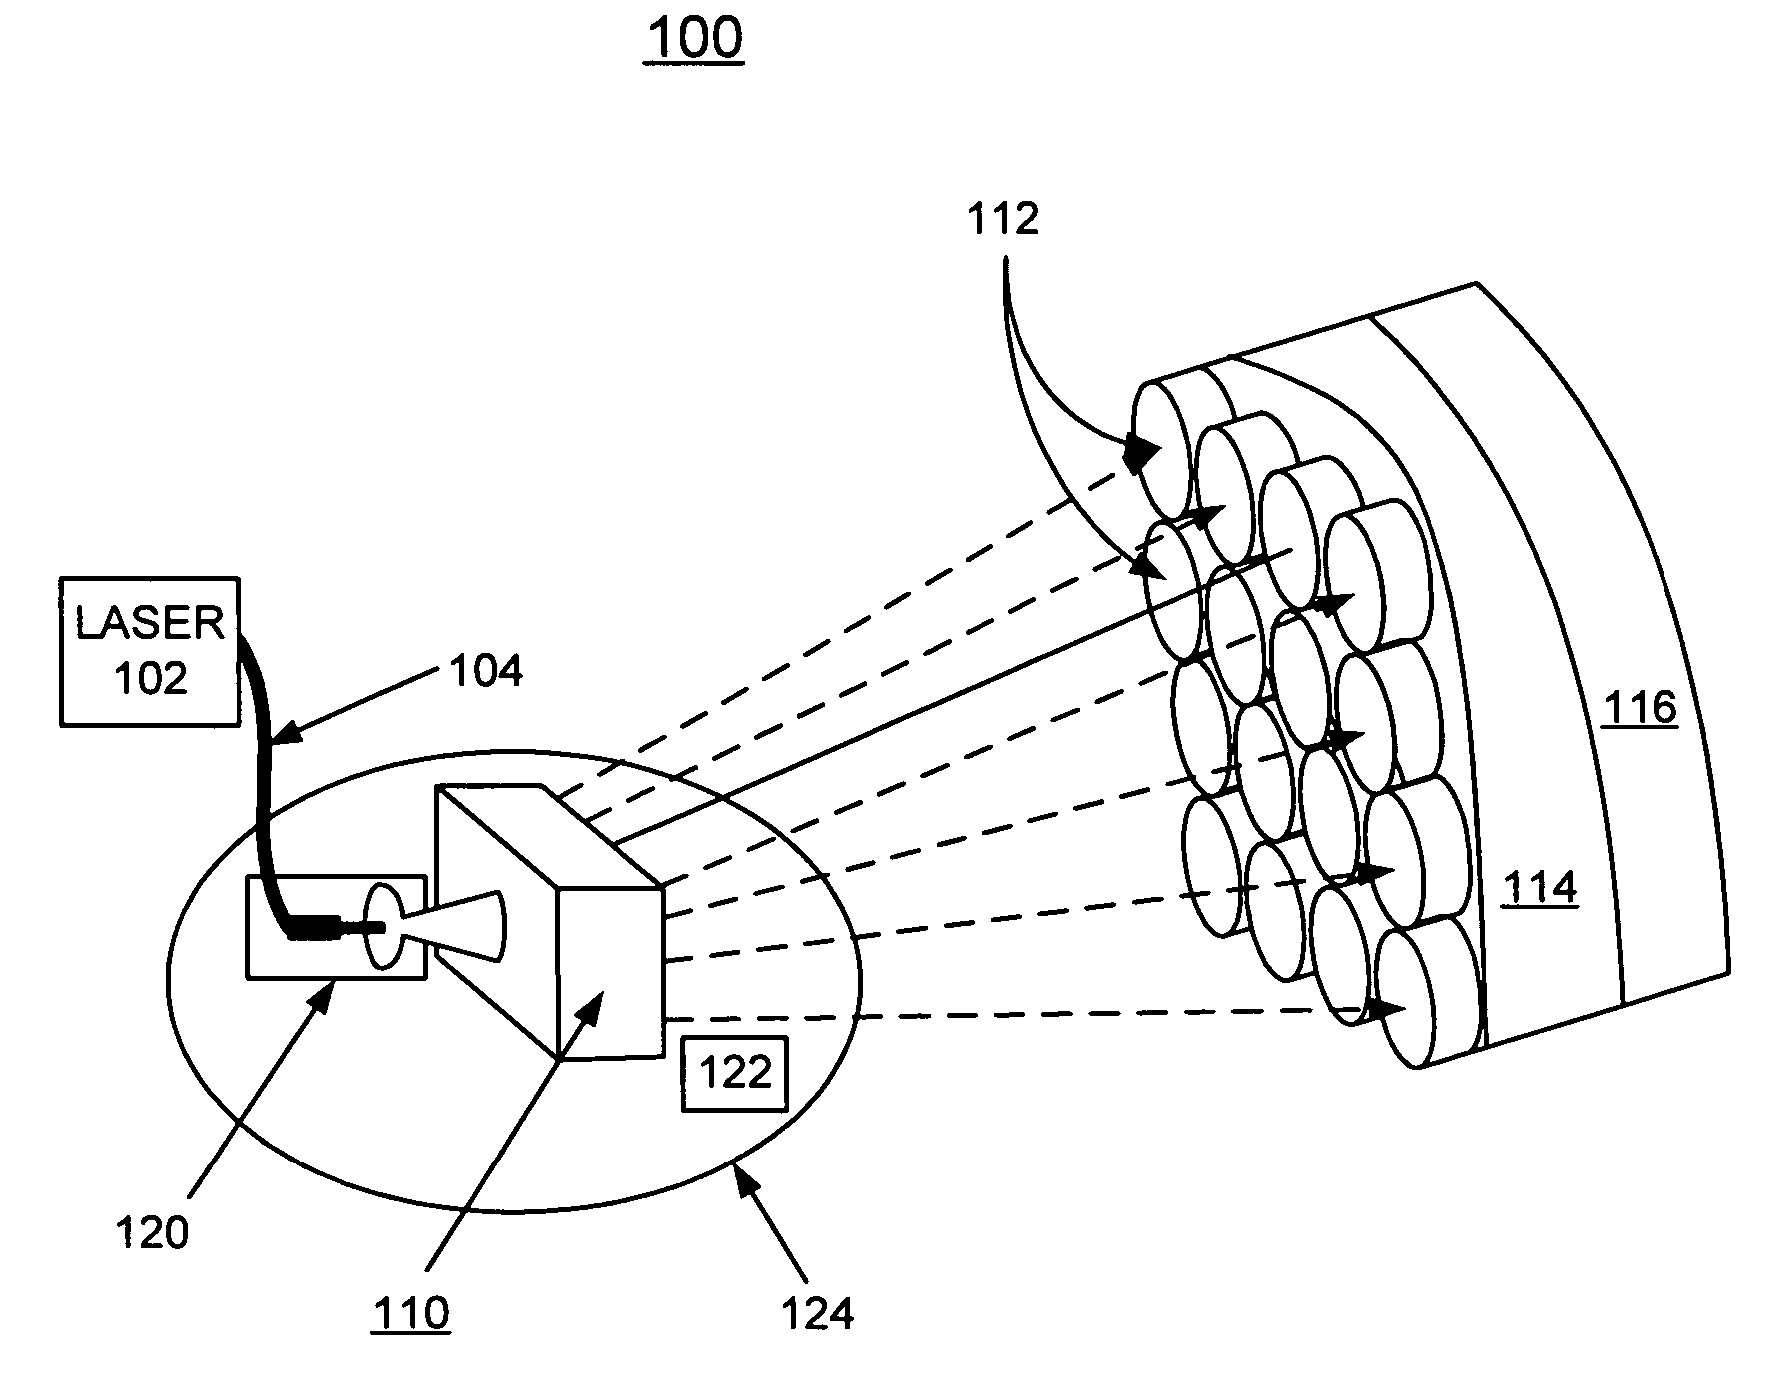 Methods of using a laser to spall and drill holes in rocks